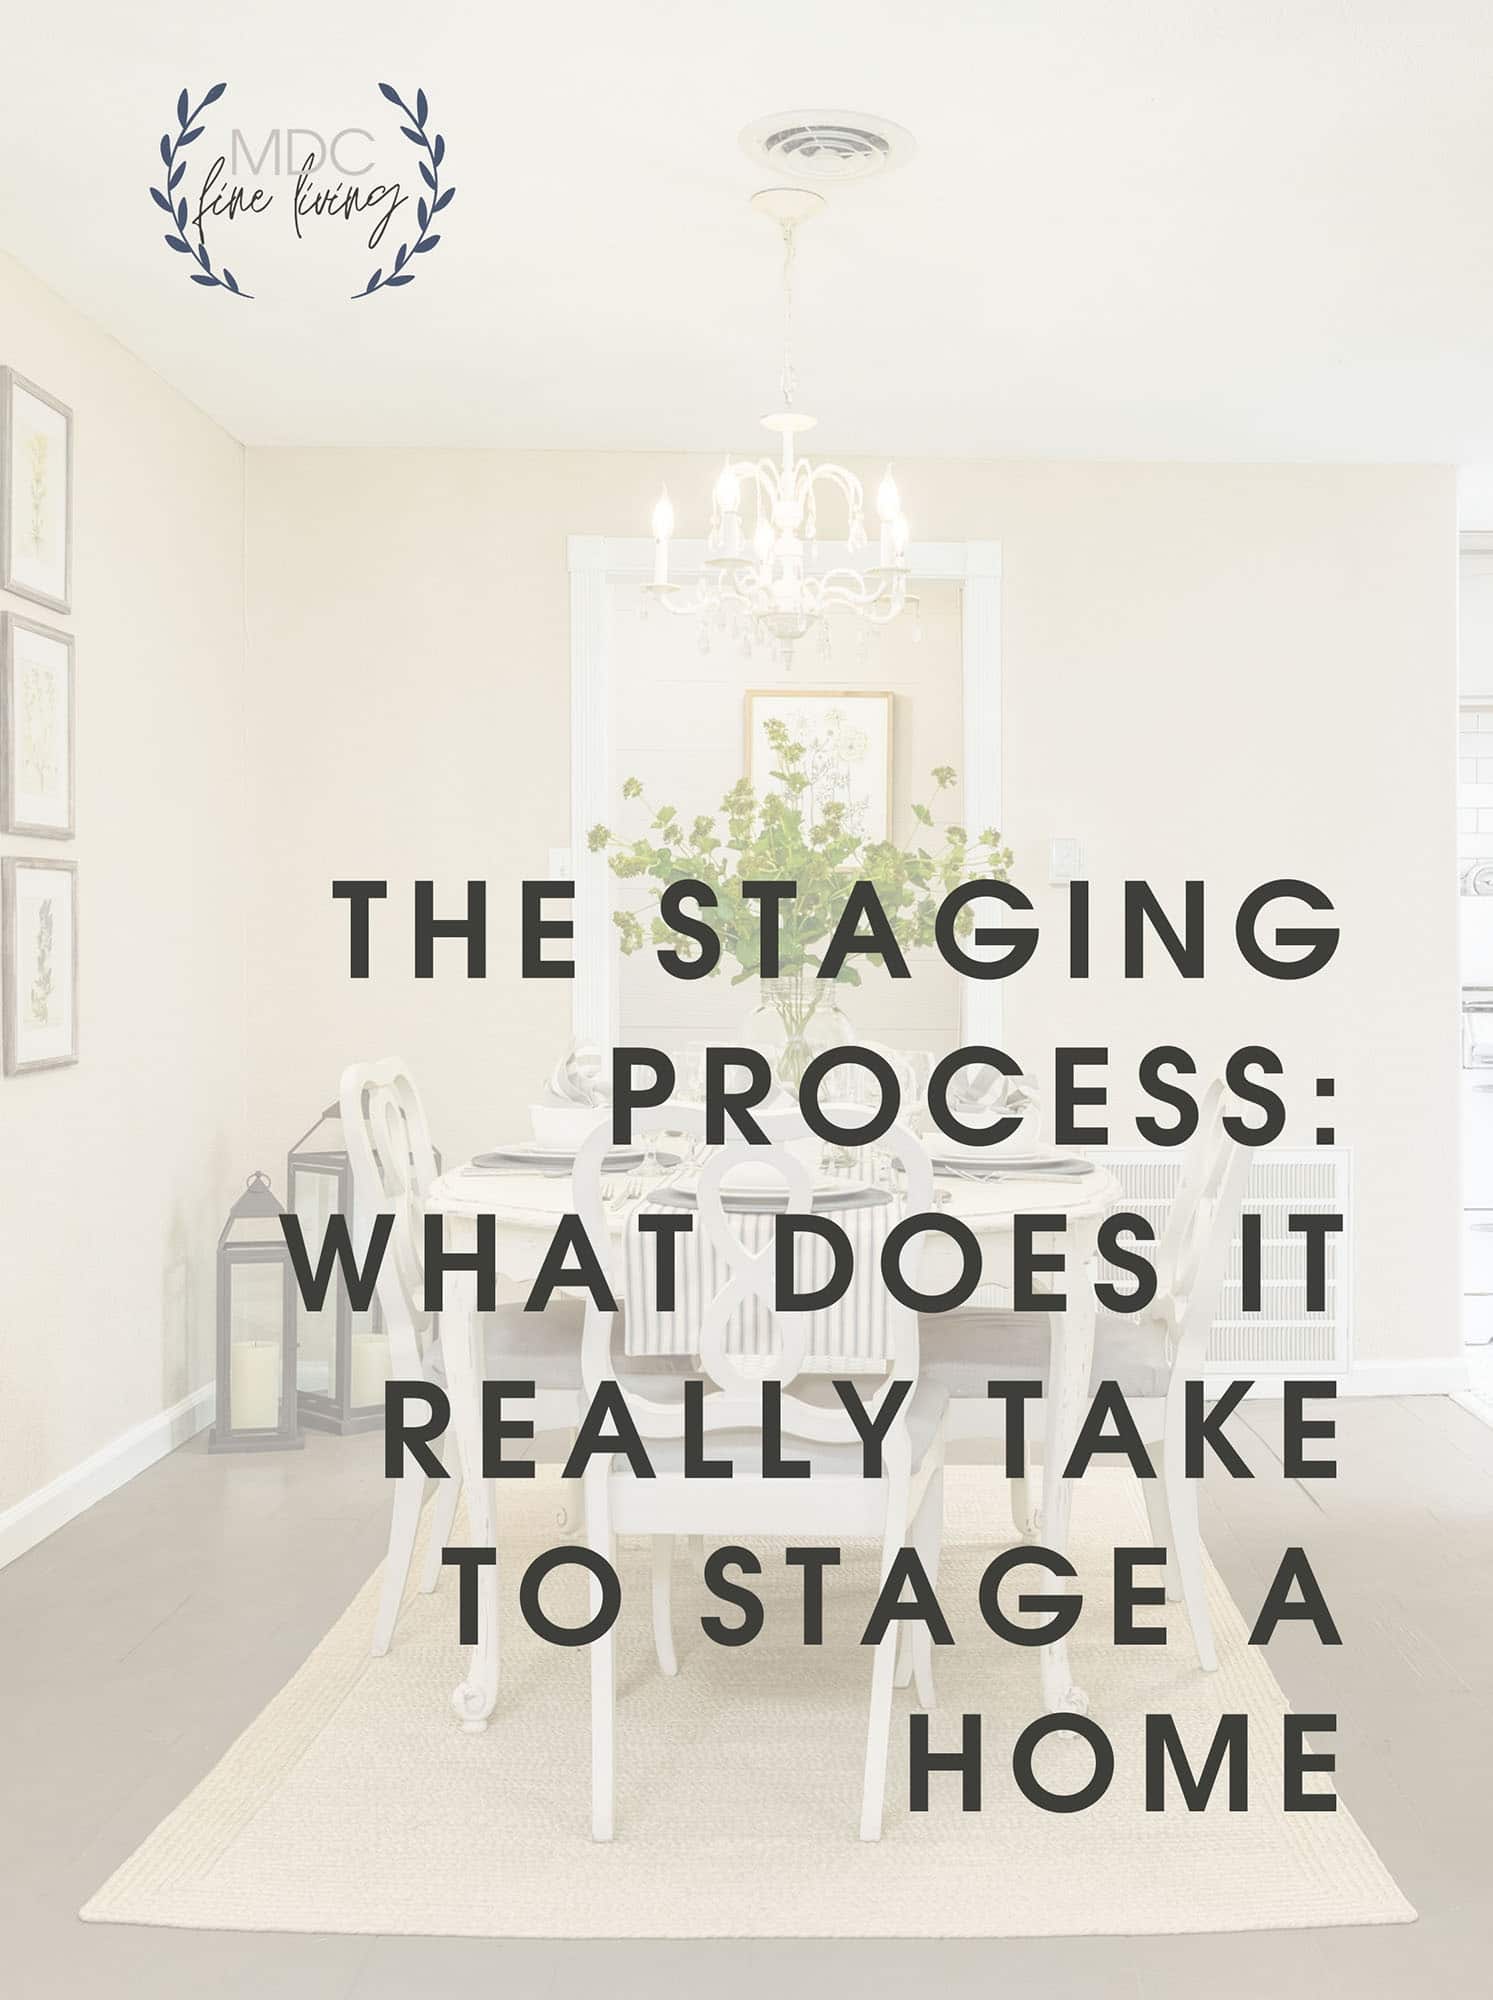 Title card for post that reads, "The Staging Process. WHAT DOES IT REALLY TAKE TO STAGE A HOME?"